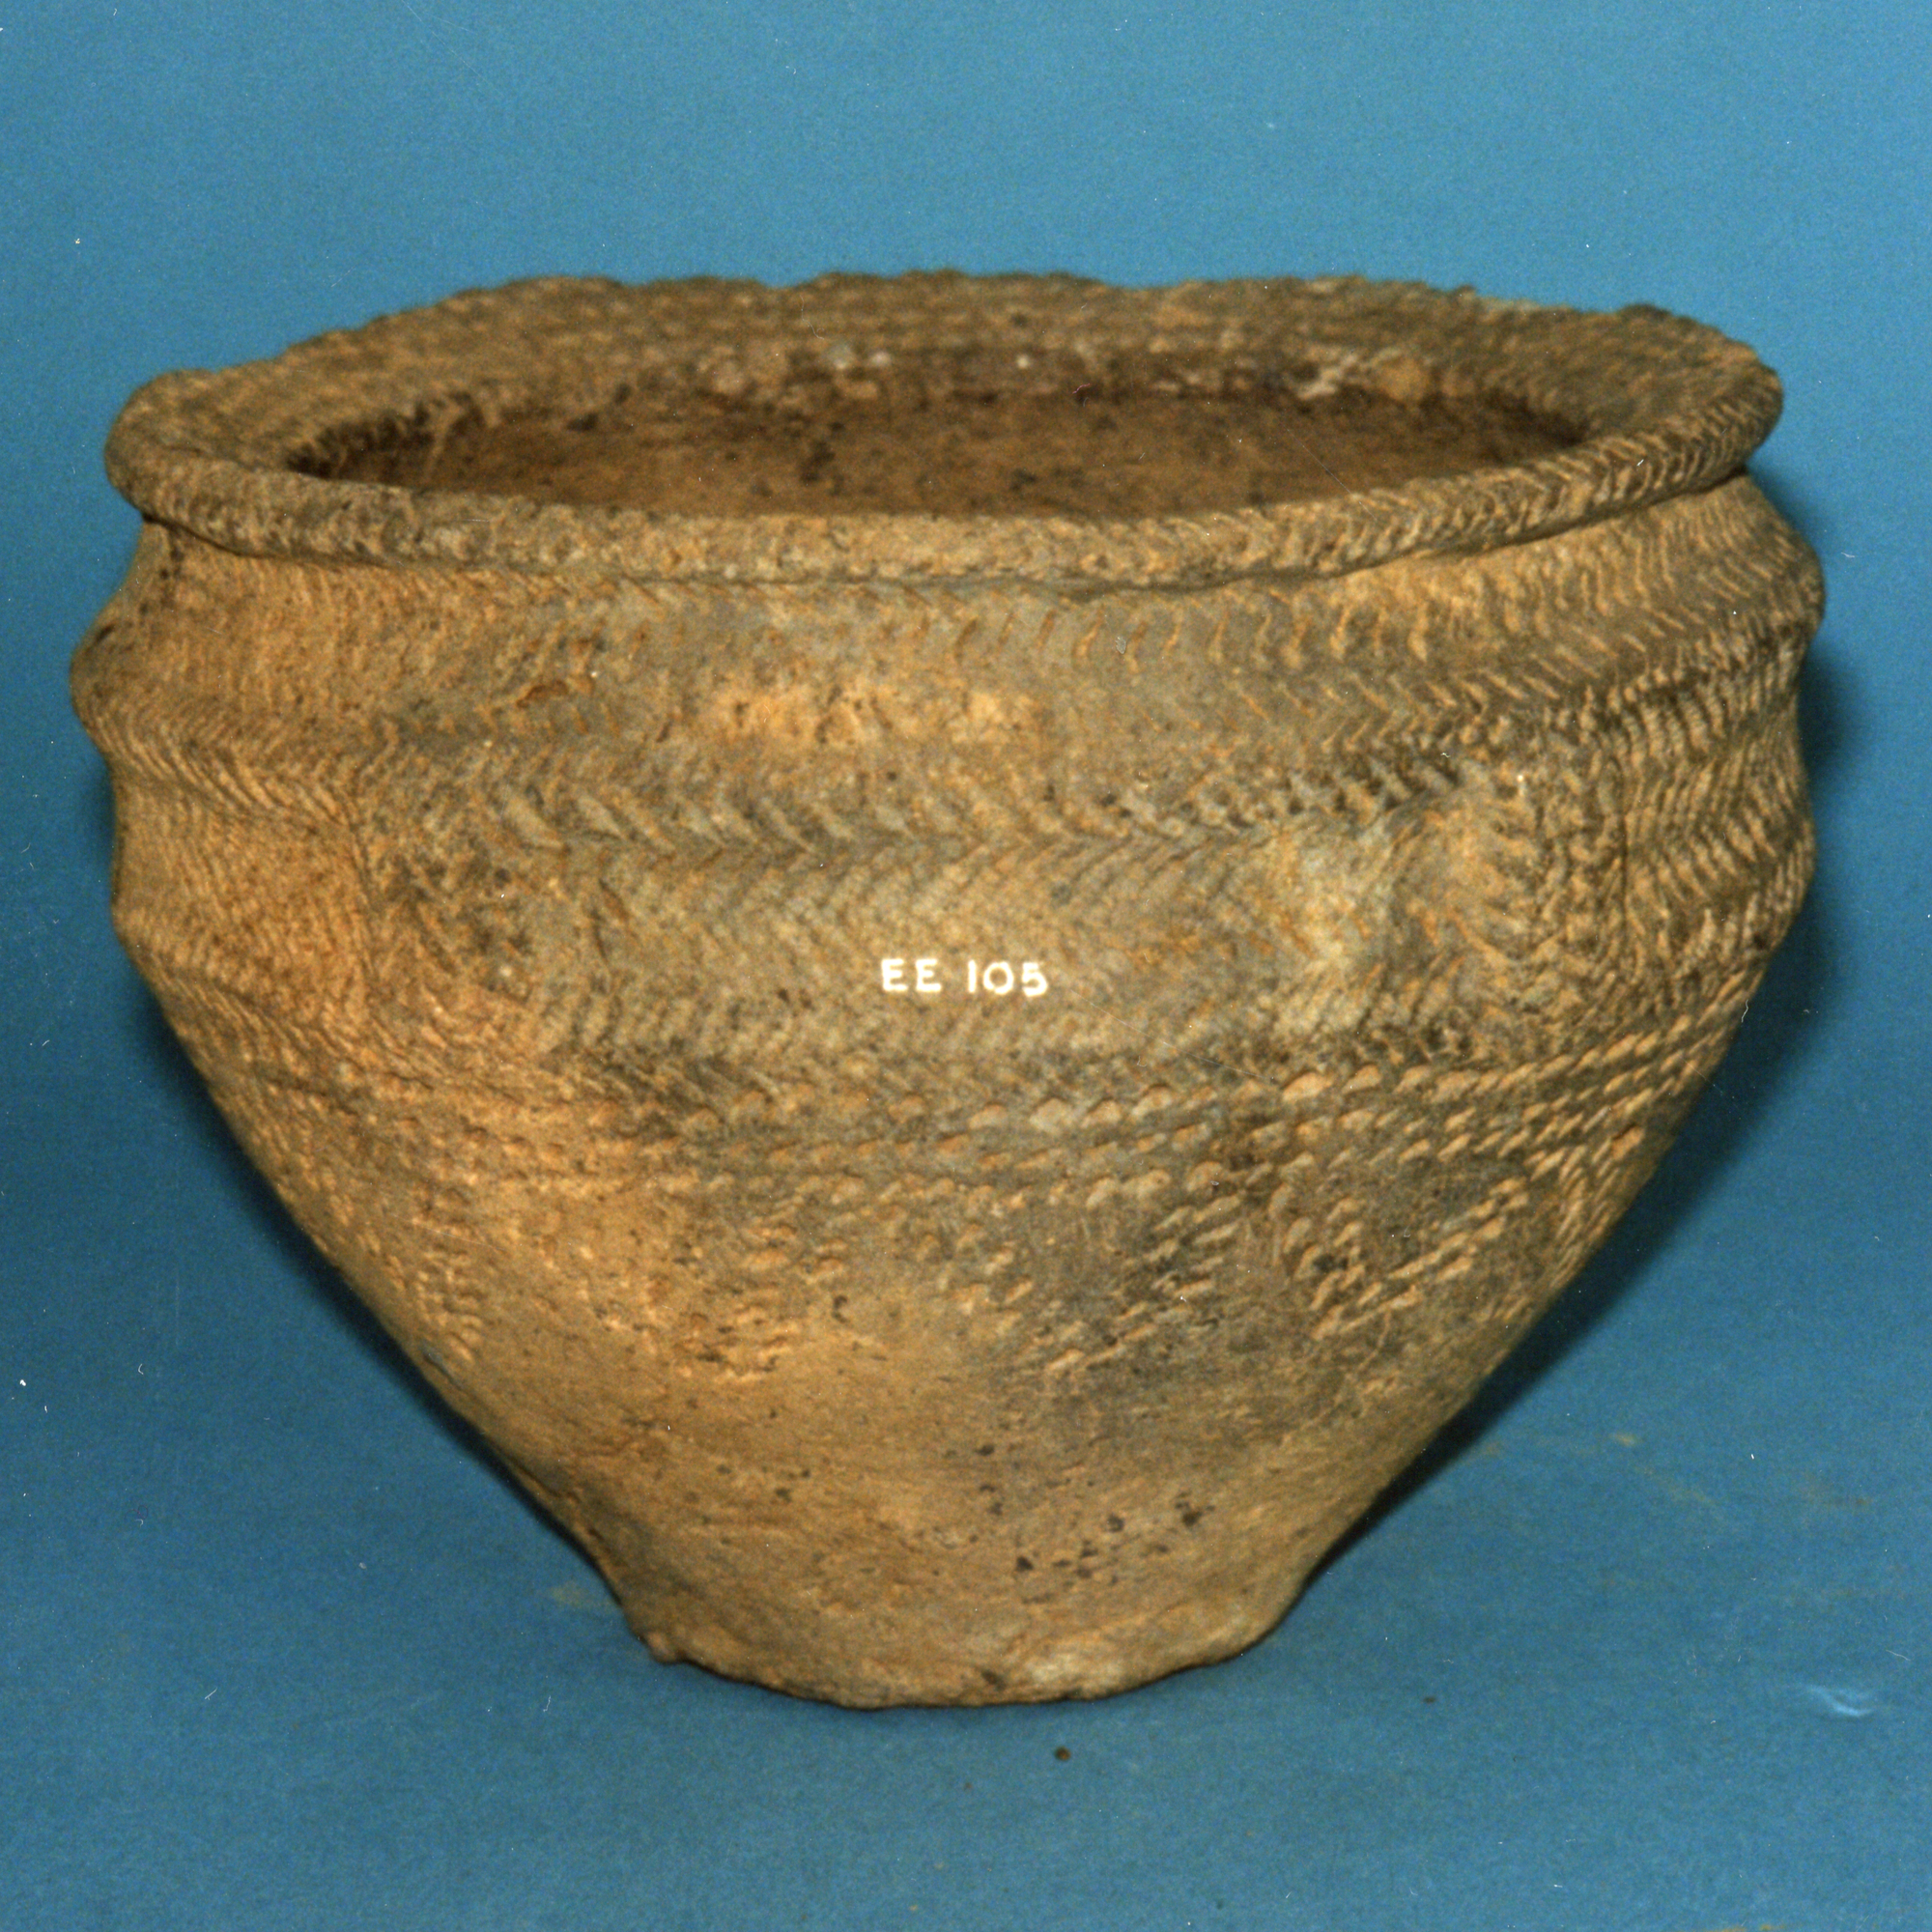 Image of Pottery food vessel from Flawcraig Farm, Kinnaird, Perthshire © National Museums Scotland